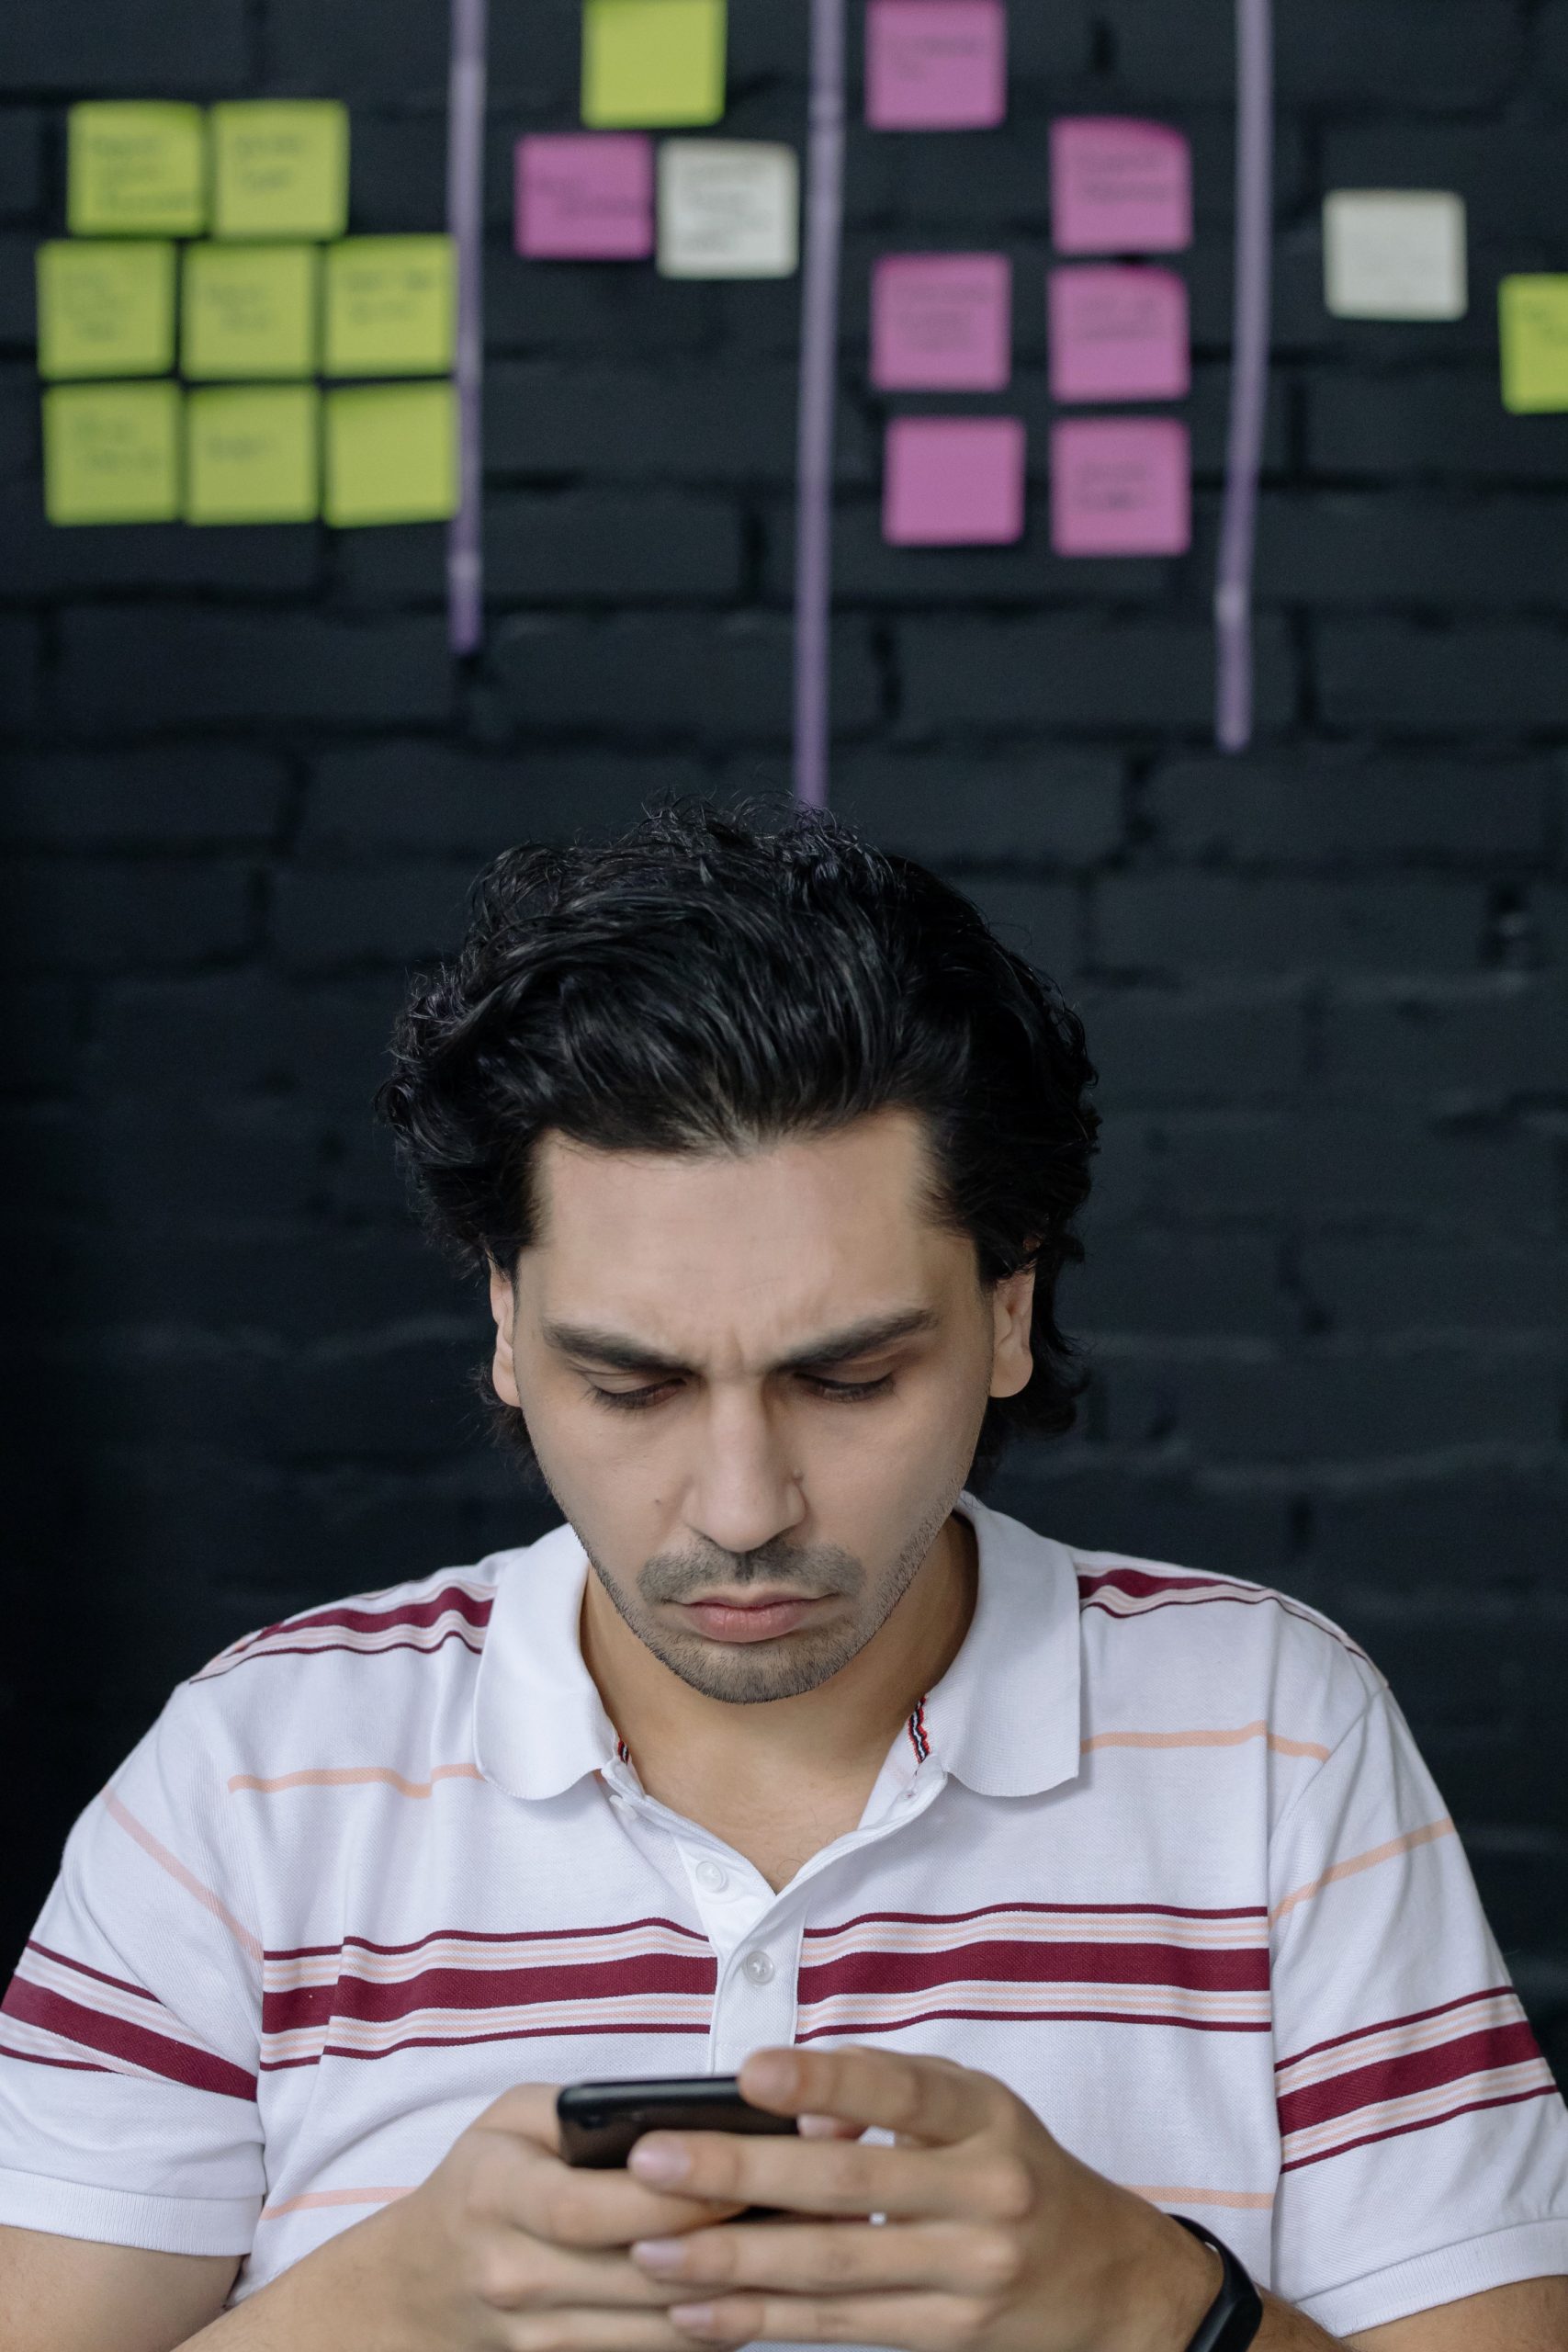 guy wearing white polo shirt with stripes, looking intently at phone. With different colored sticky notes on the wall behind him